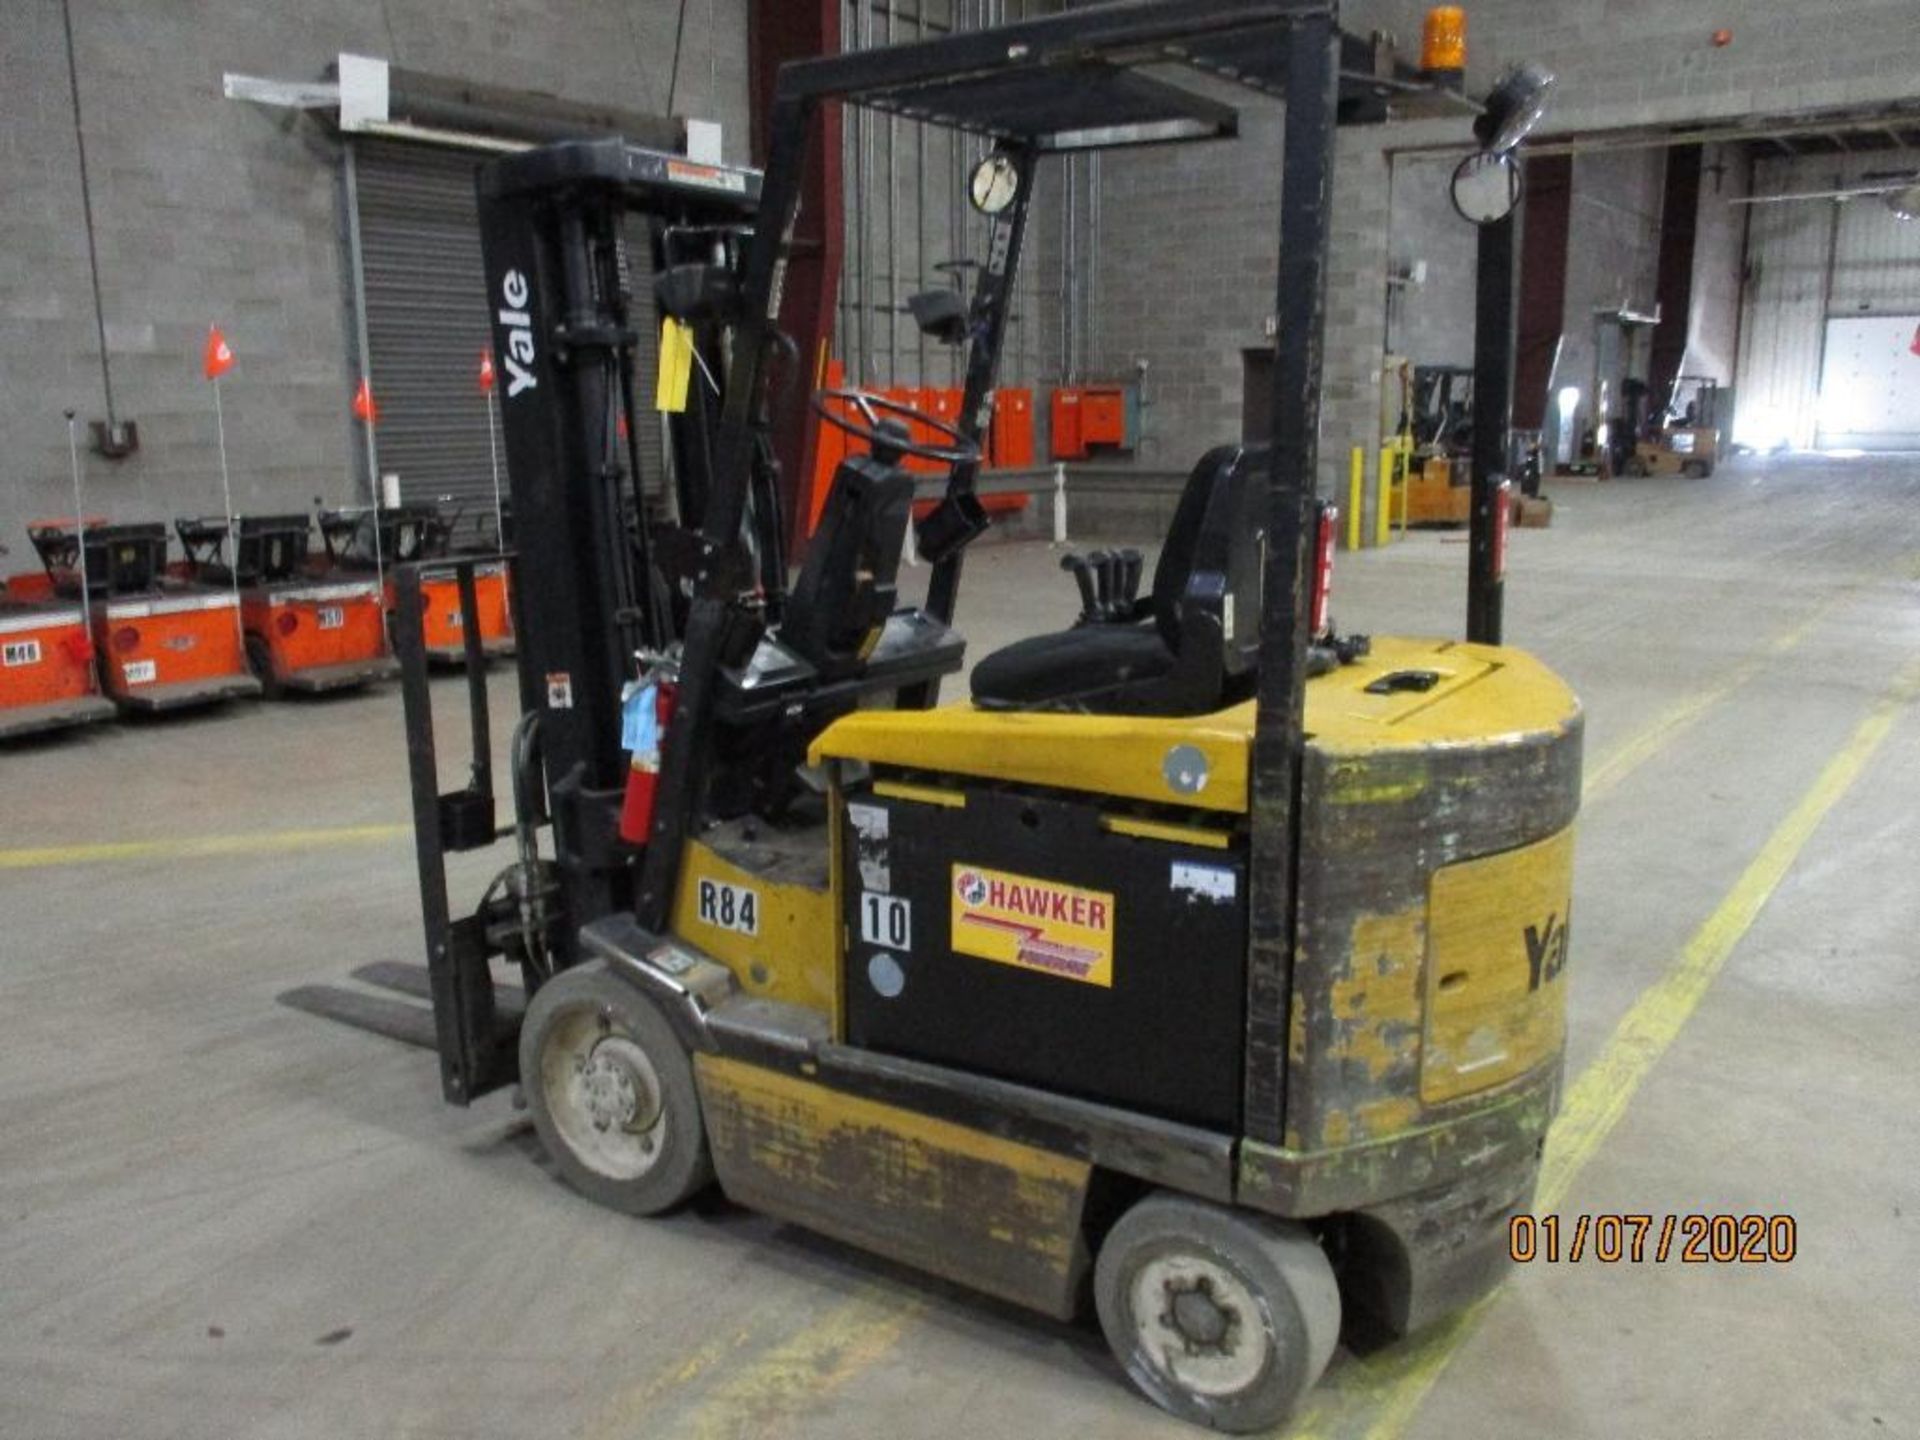 Yale Electric Forklift (R84) Double Mast, Side Shift, Auto Adjust 47" Forks, Approx. Height Reach 19 - Image 4 of 6